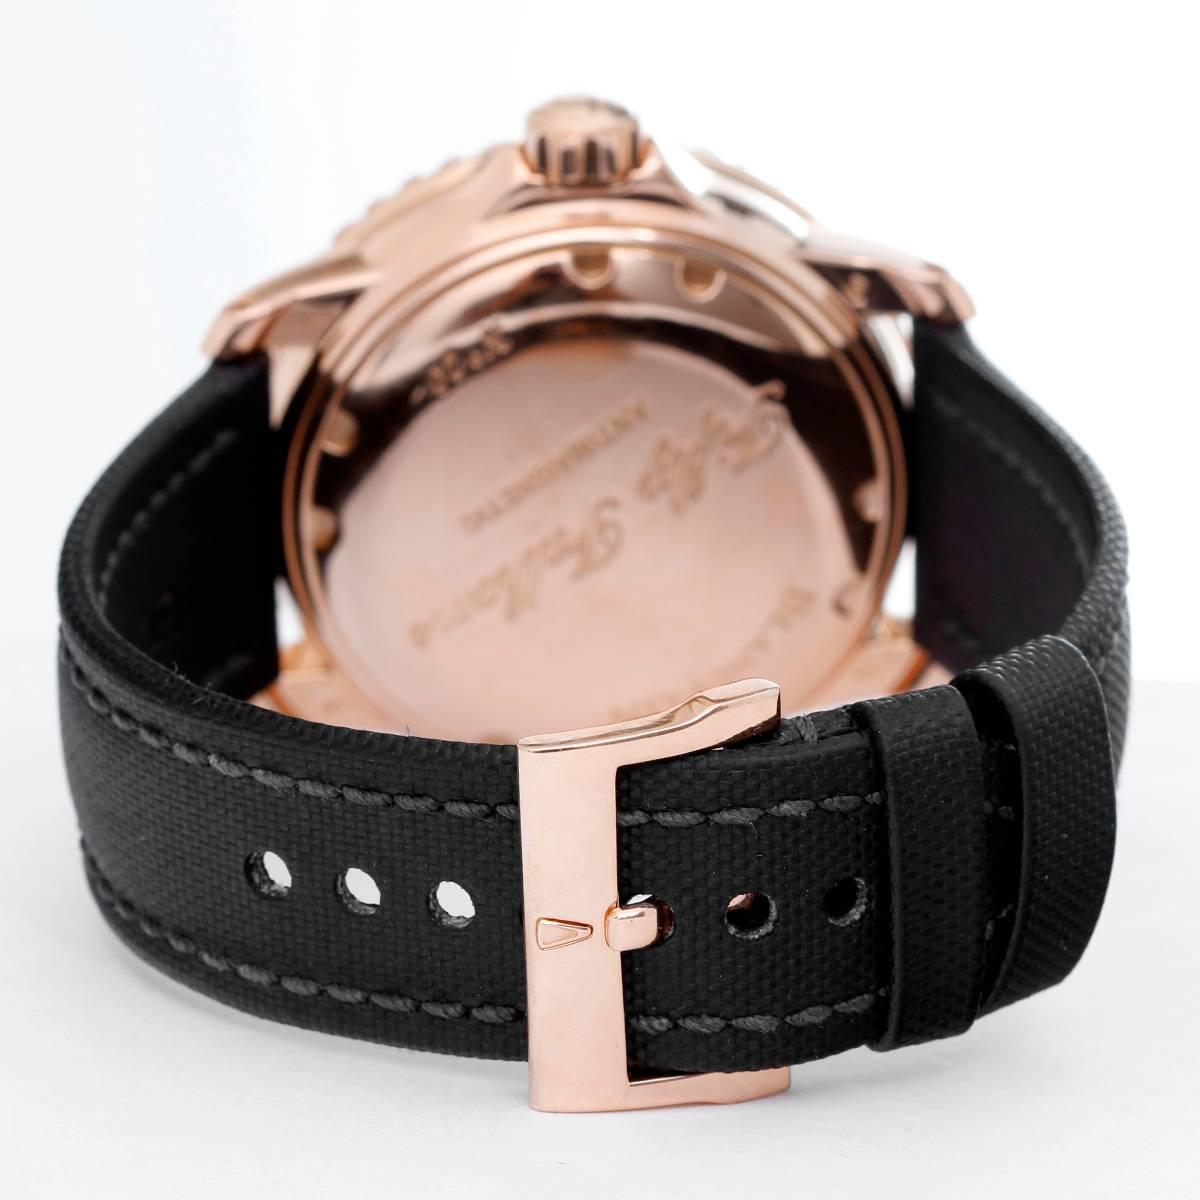 Blancpain 50 Fathoms 18k rose gold watch 5015-3630-52 -  Automatic winding. 18k rose gold case with unidirectional bezel, (45mm). Black dial with  luminous style markers, date. Black fabric strap with Blancpain rose gold buckle. Pre-owned with box.